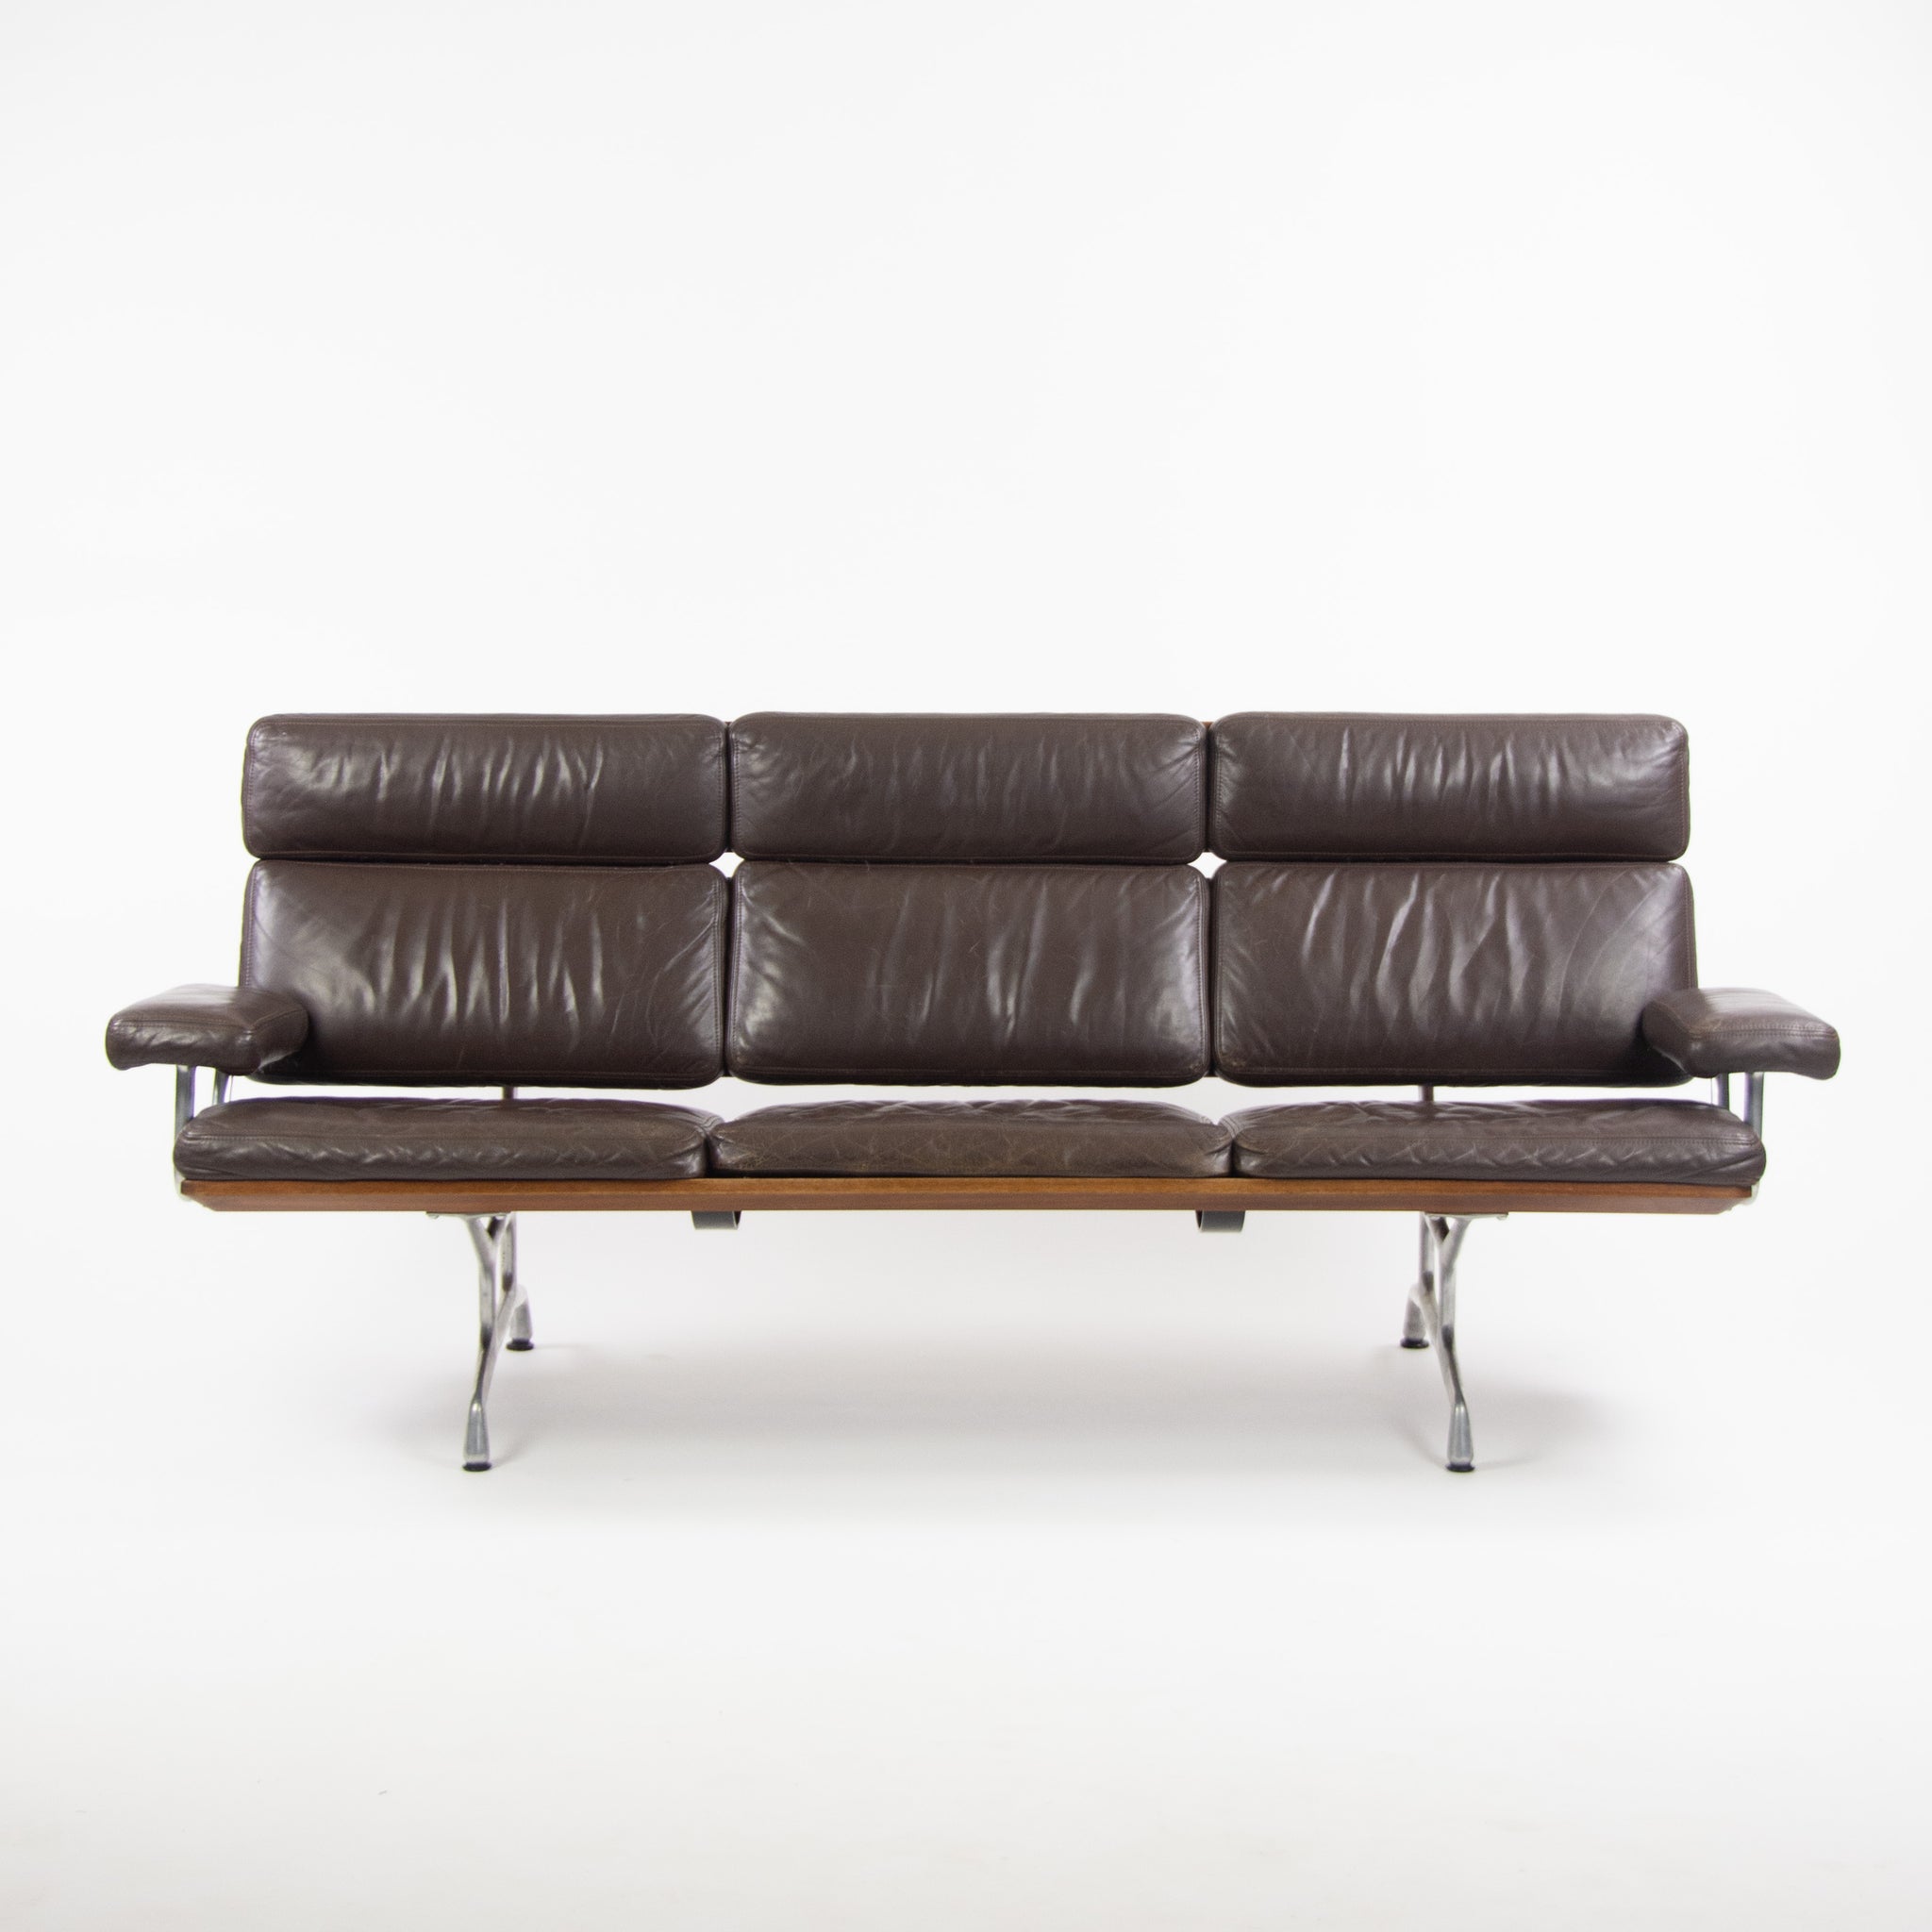 SOLD 1980s Vintage Eames Herman Miller Three Seater Sofa Walnut and Brown Leather #1